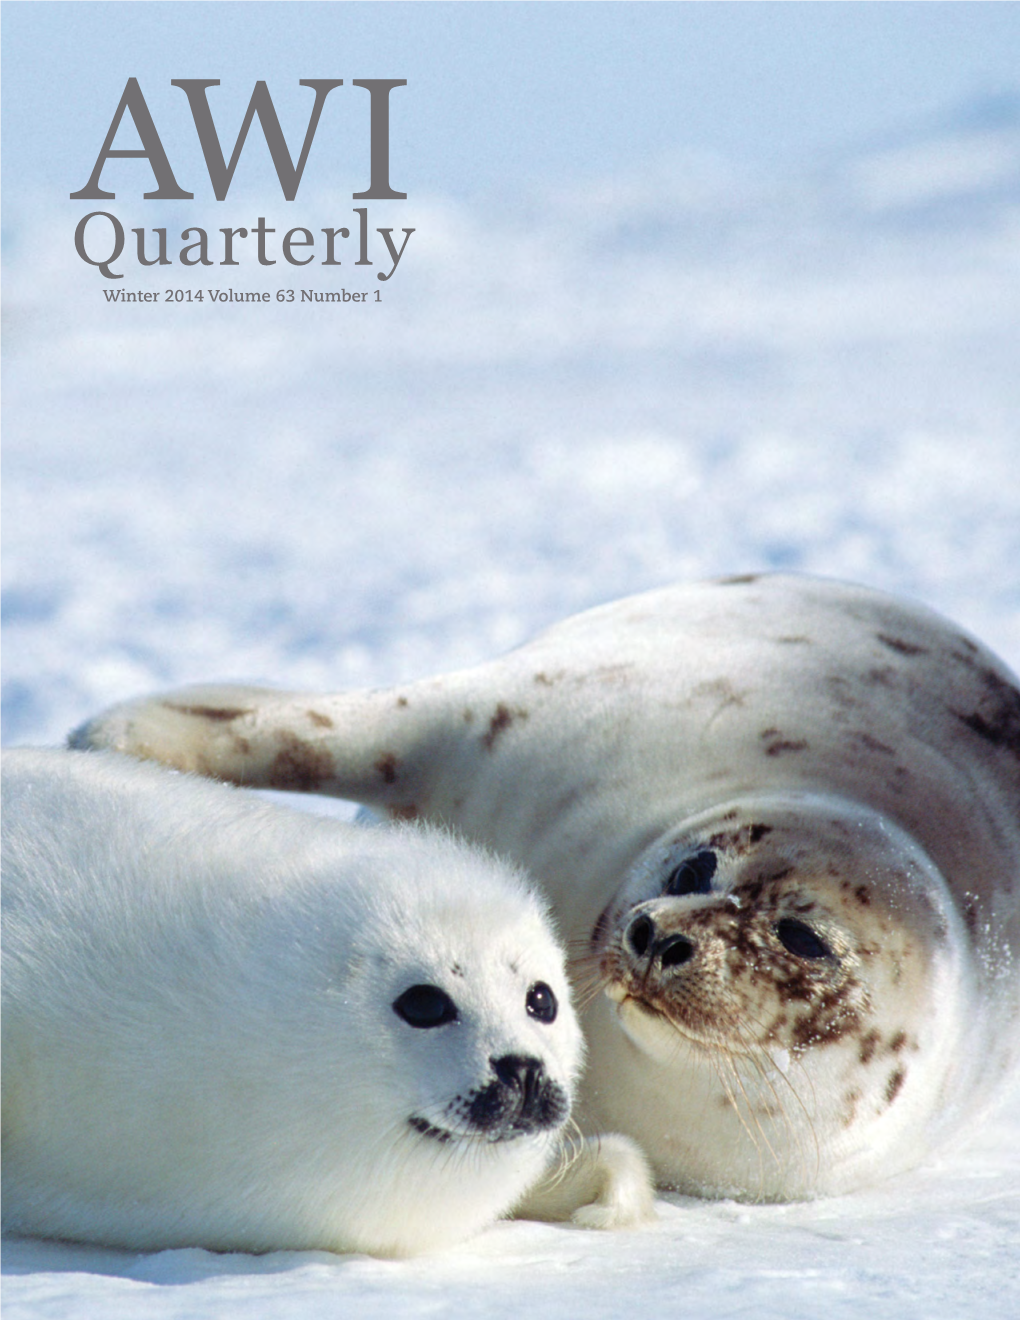 Quarterlyaw I Winter 2014 Volume 63 Number 1 AW I Quarterly ABOUT the COVER a Harp Seal Mother and Pup Haul out on Ice in the Gulf of St Lawrence, Canada